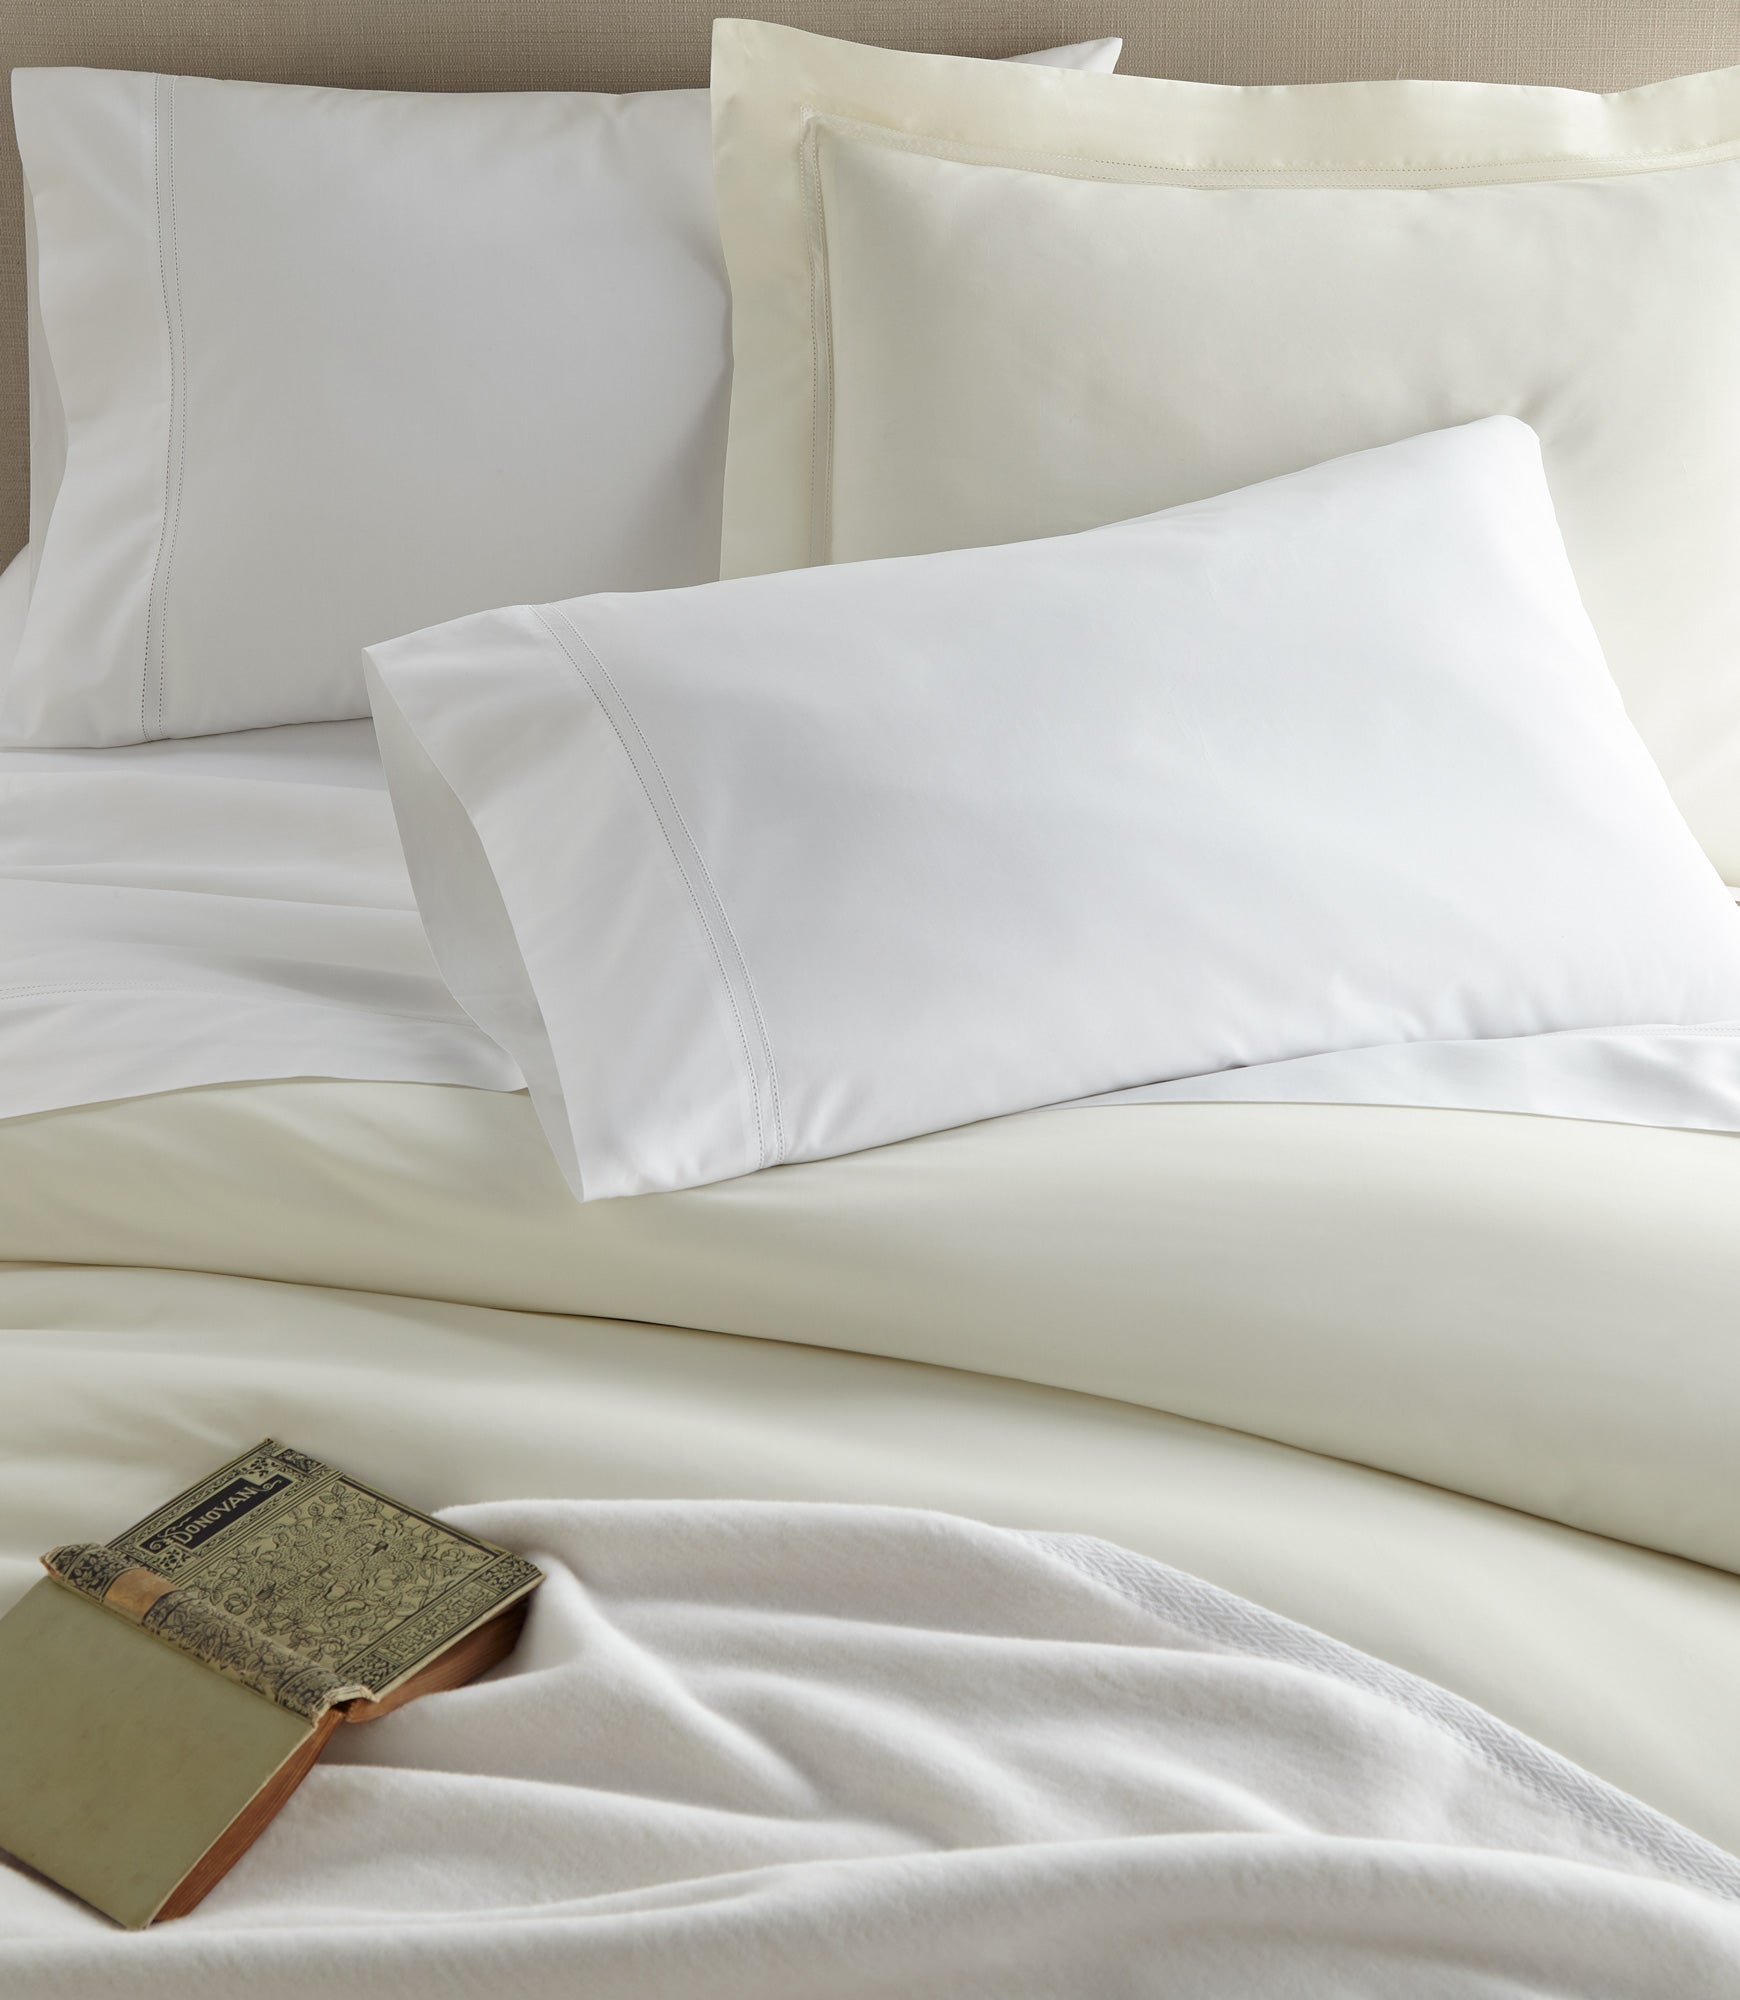 Virtuoso Sateen Sheet Set Ivory and White on a Bed